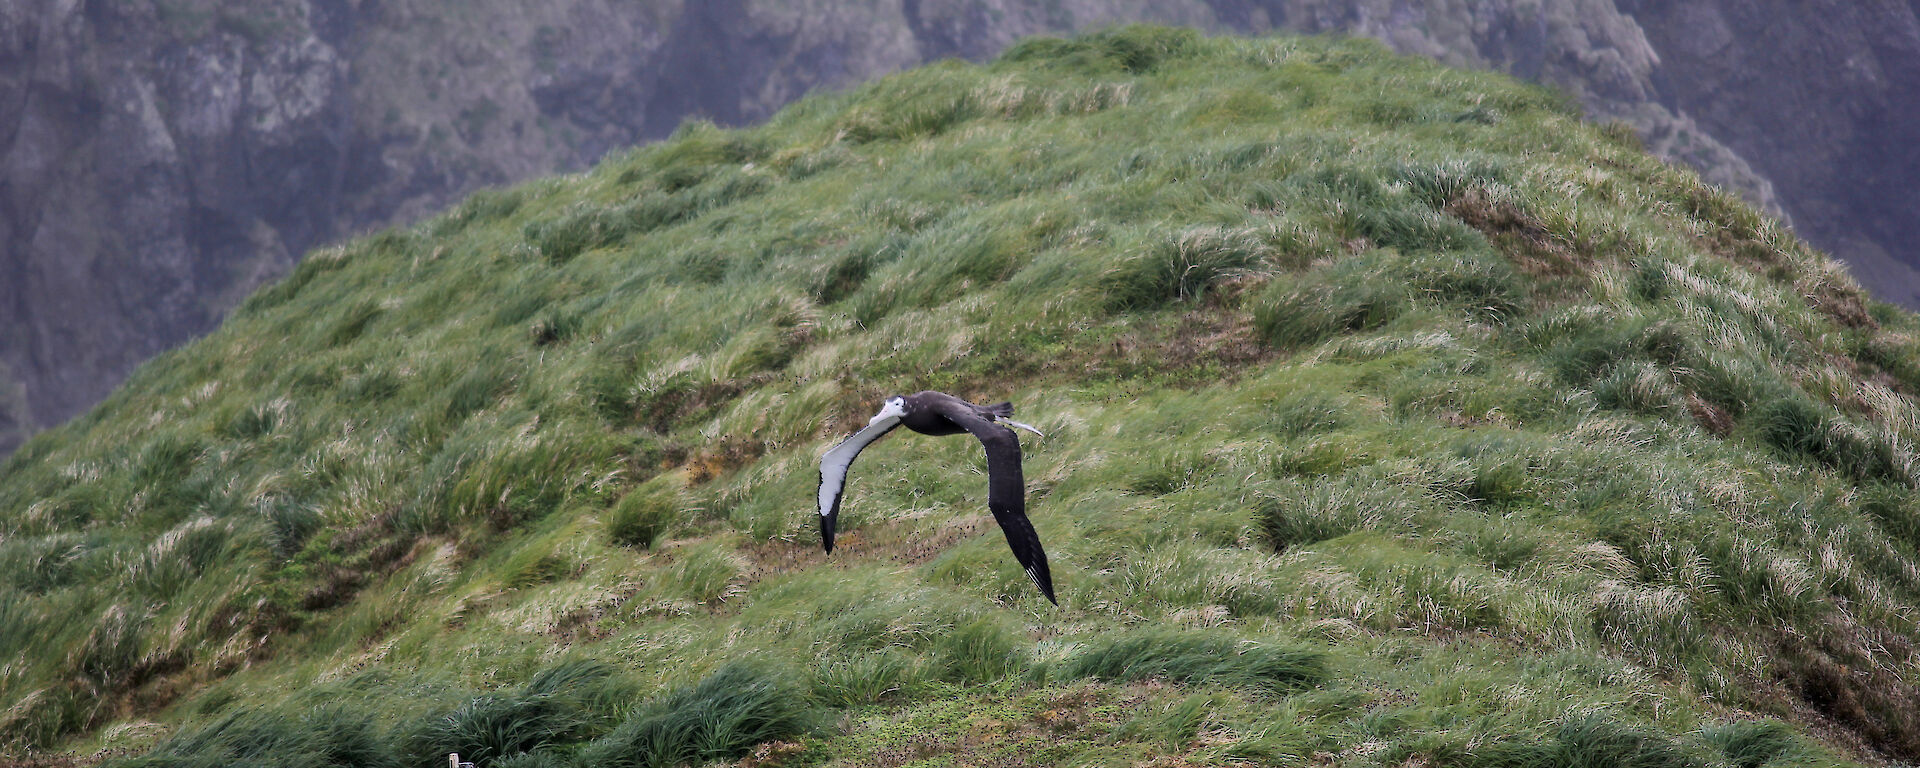 A wandering albatross flying for the first time on Macquarie Island